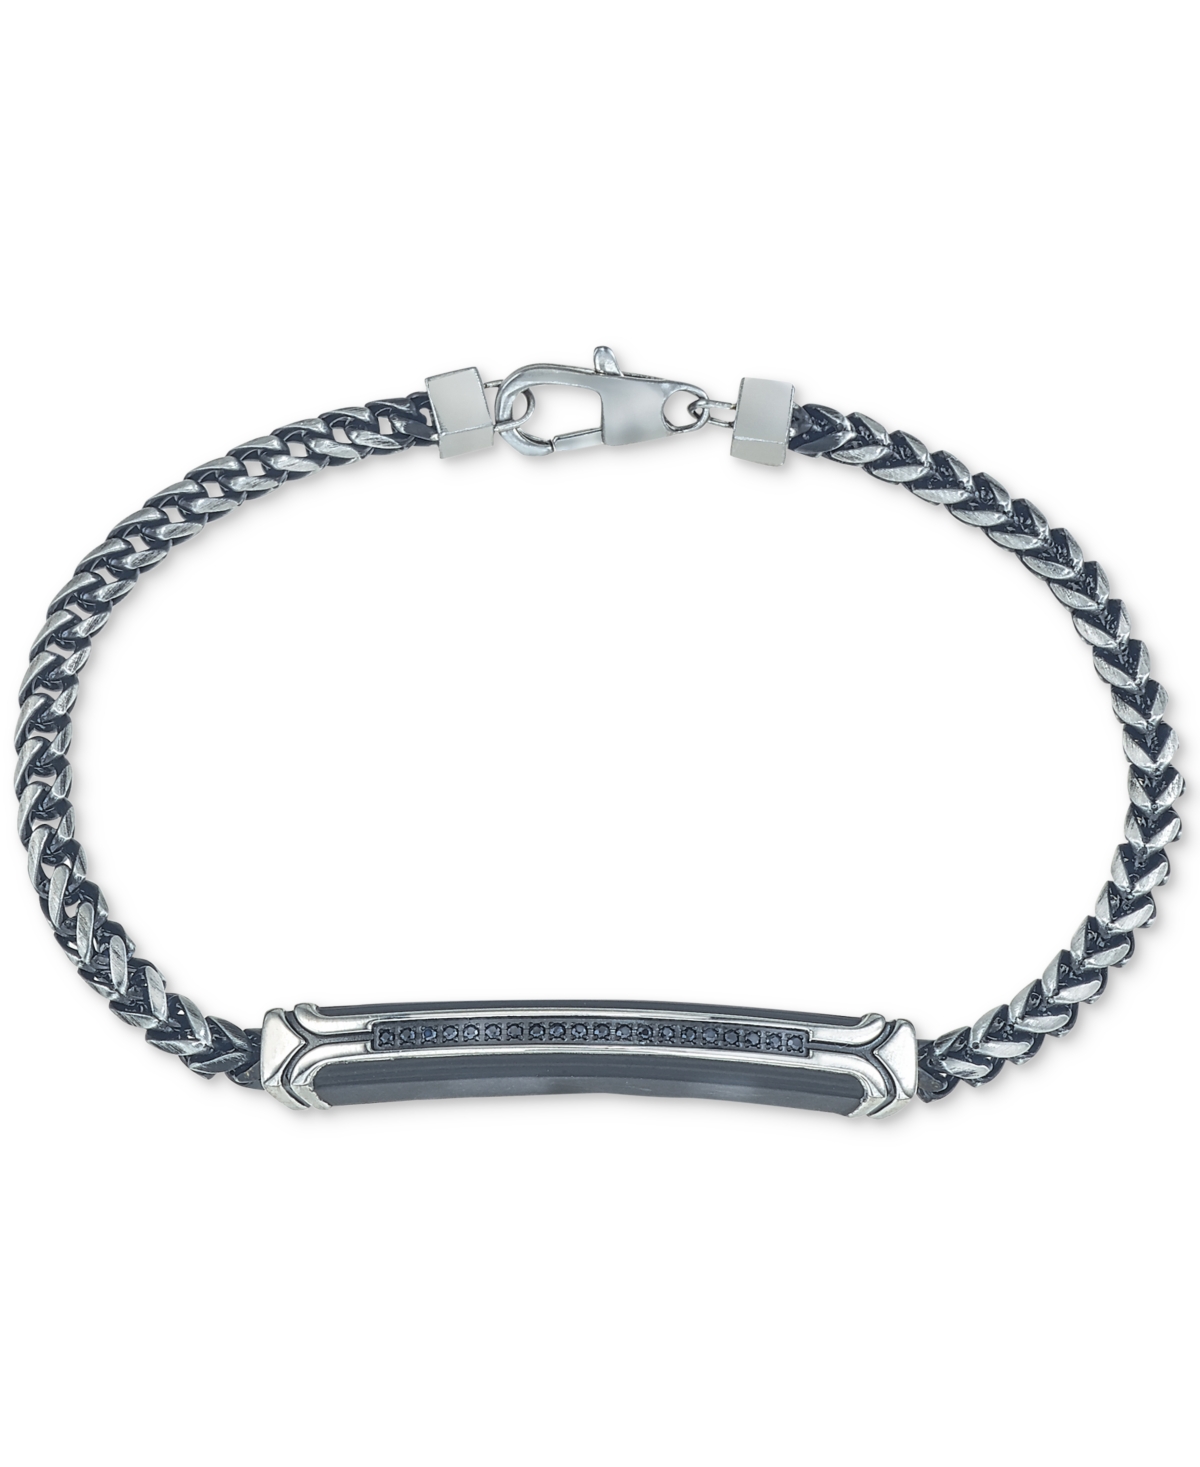 Diamond Link Bracelet (1/10 ct. t.w.) in Black or Blue Ion-Plated Stainless Steel, Created for Macy's - Black